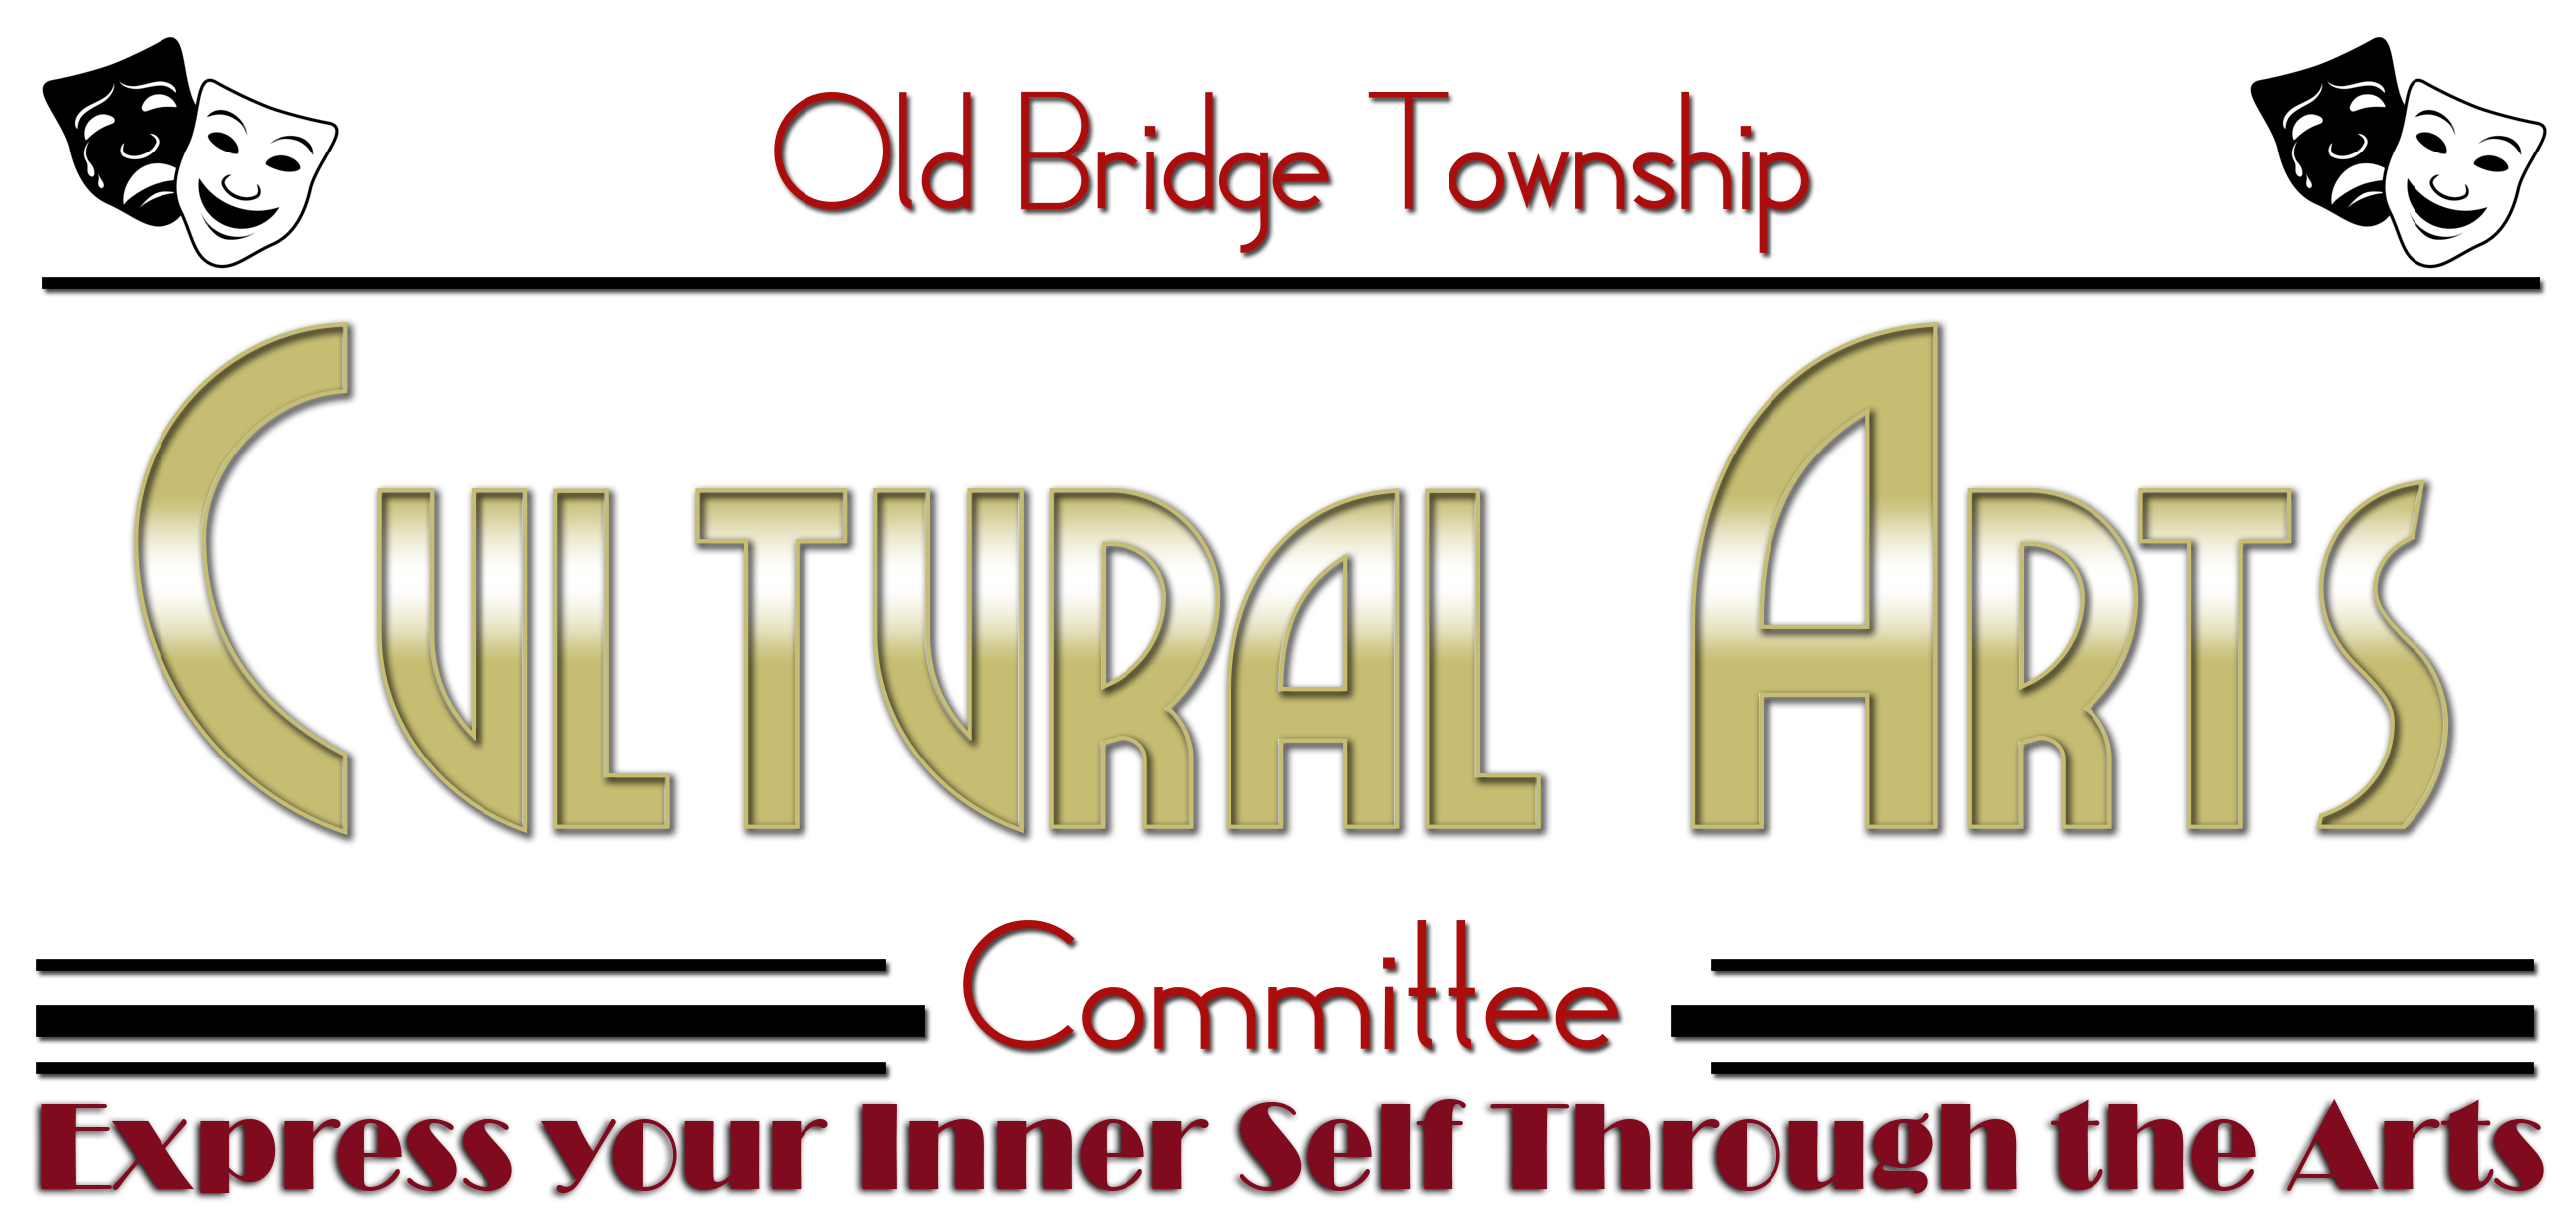 Cultural Arts Committee Logo